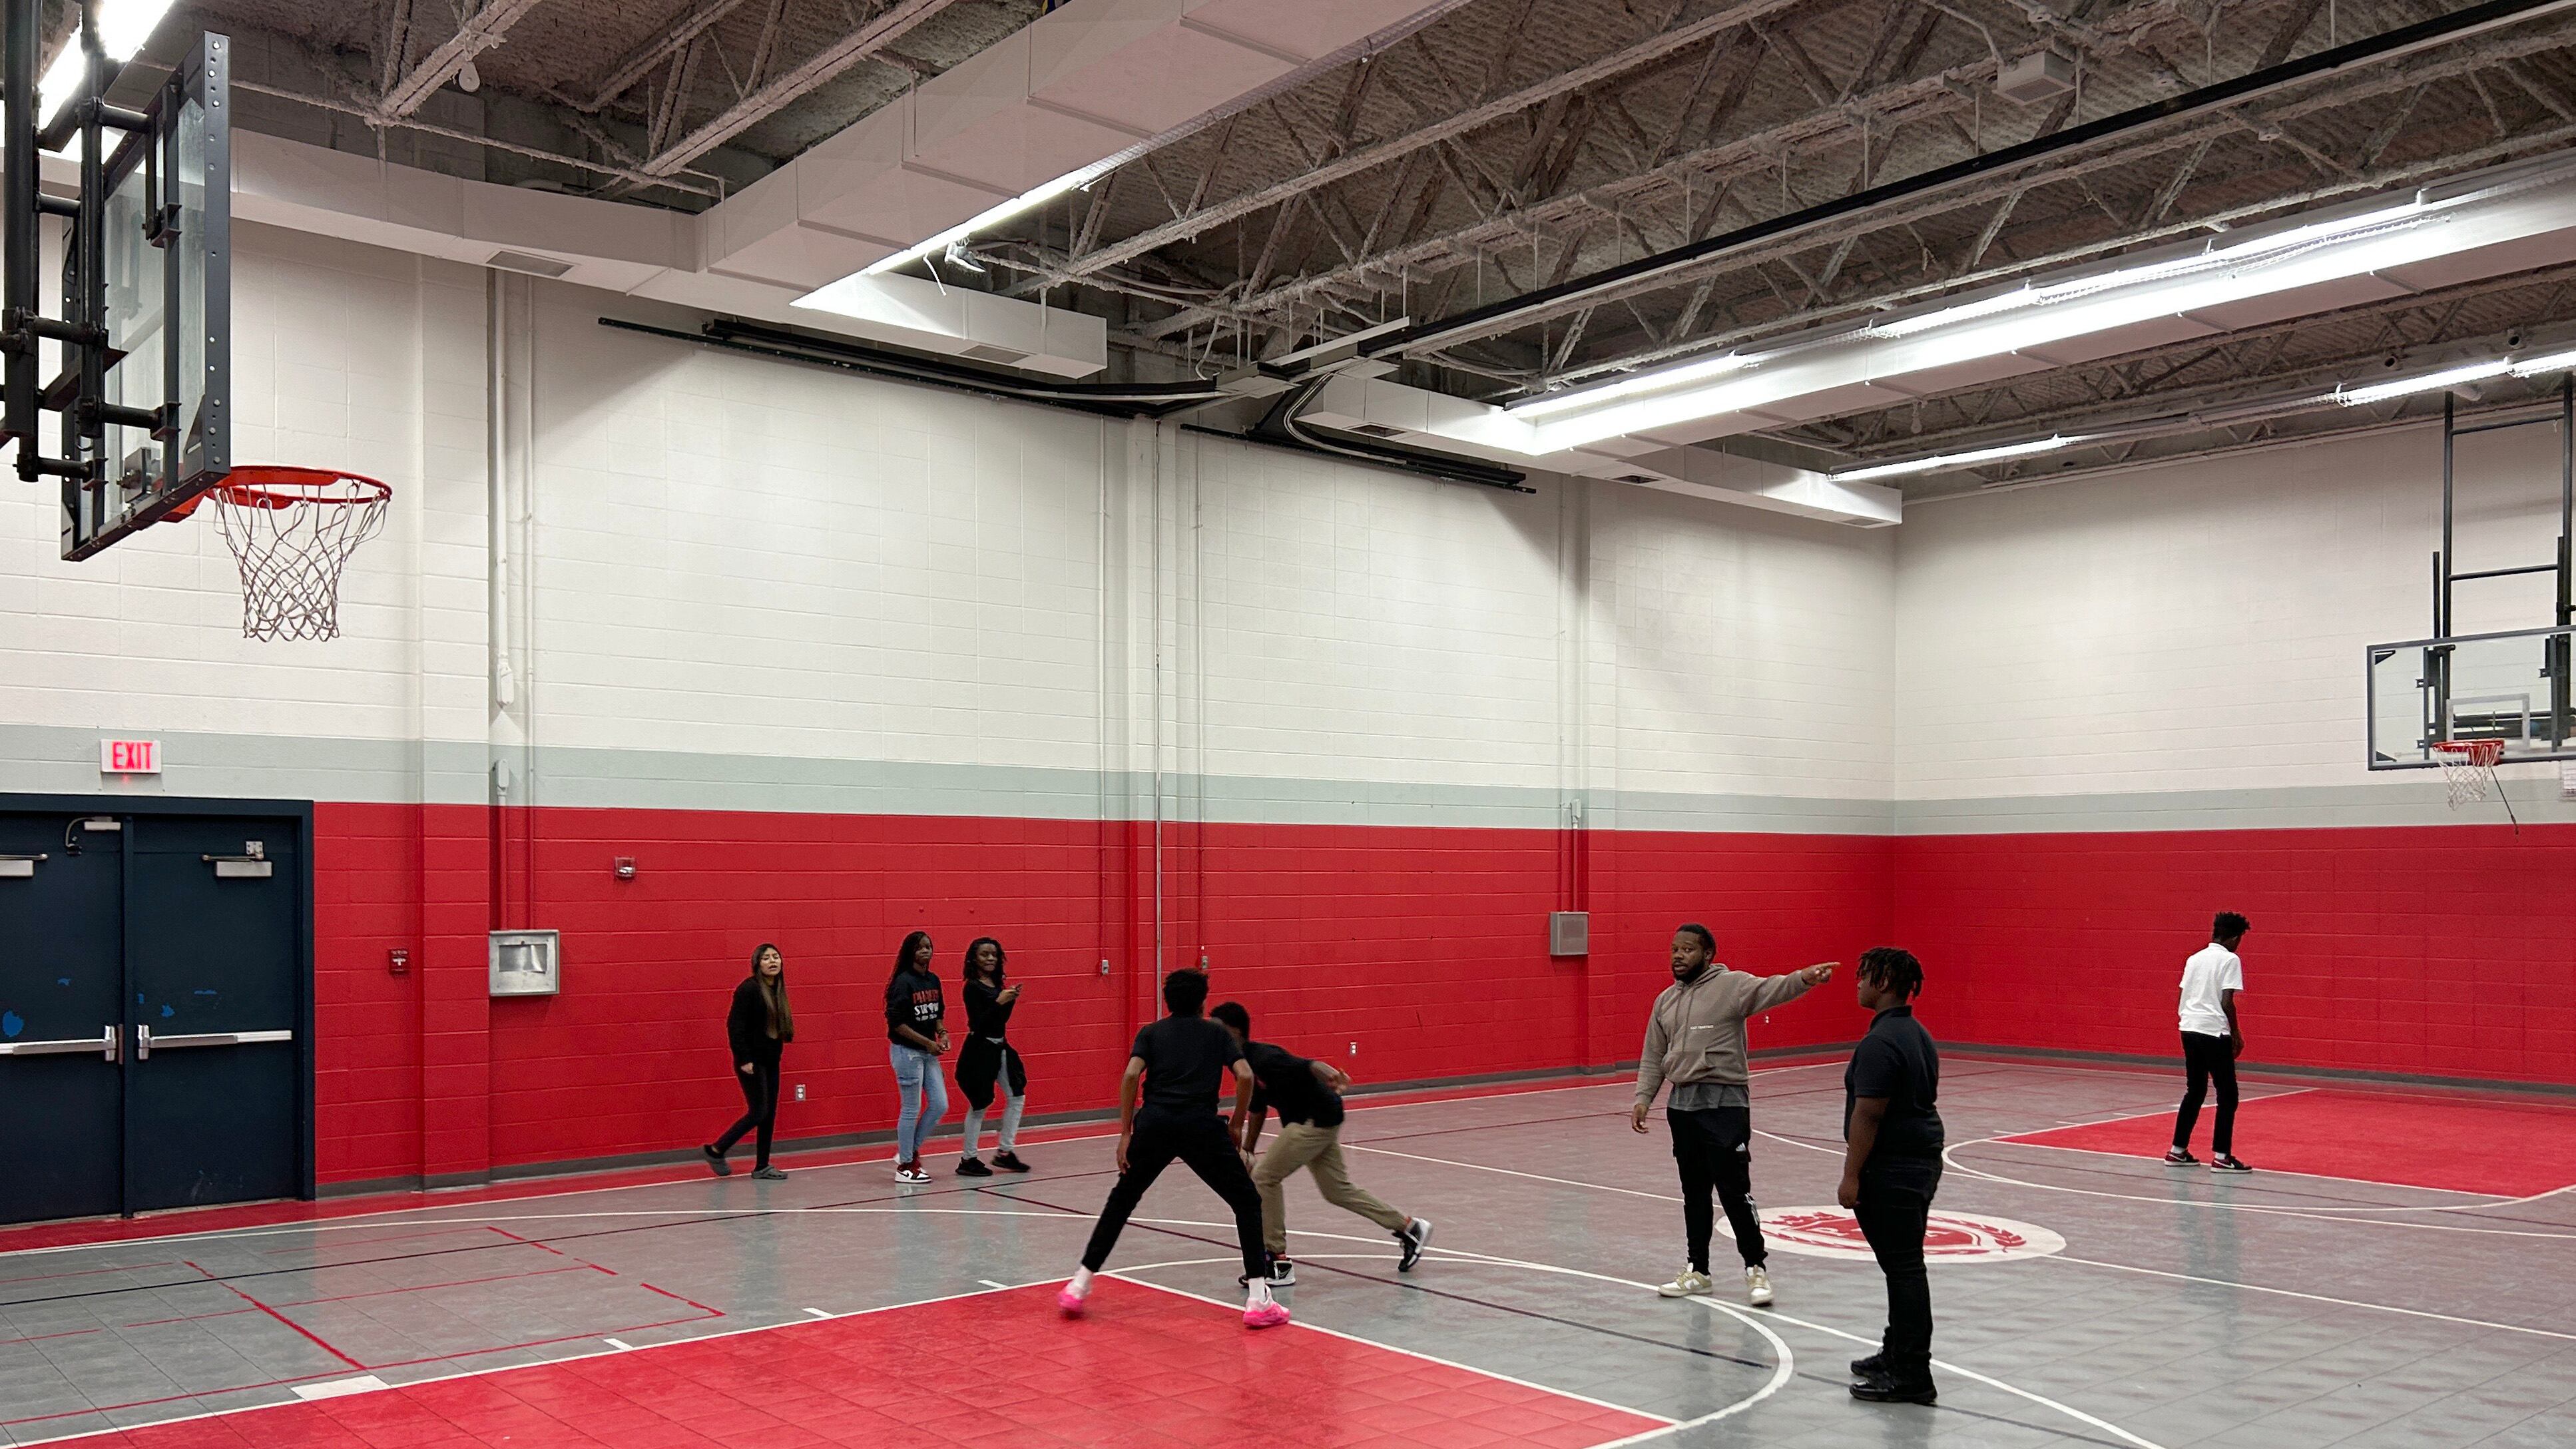 Eight people play basketball or stand in a gym with red and grey flooring and tall walls.